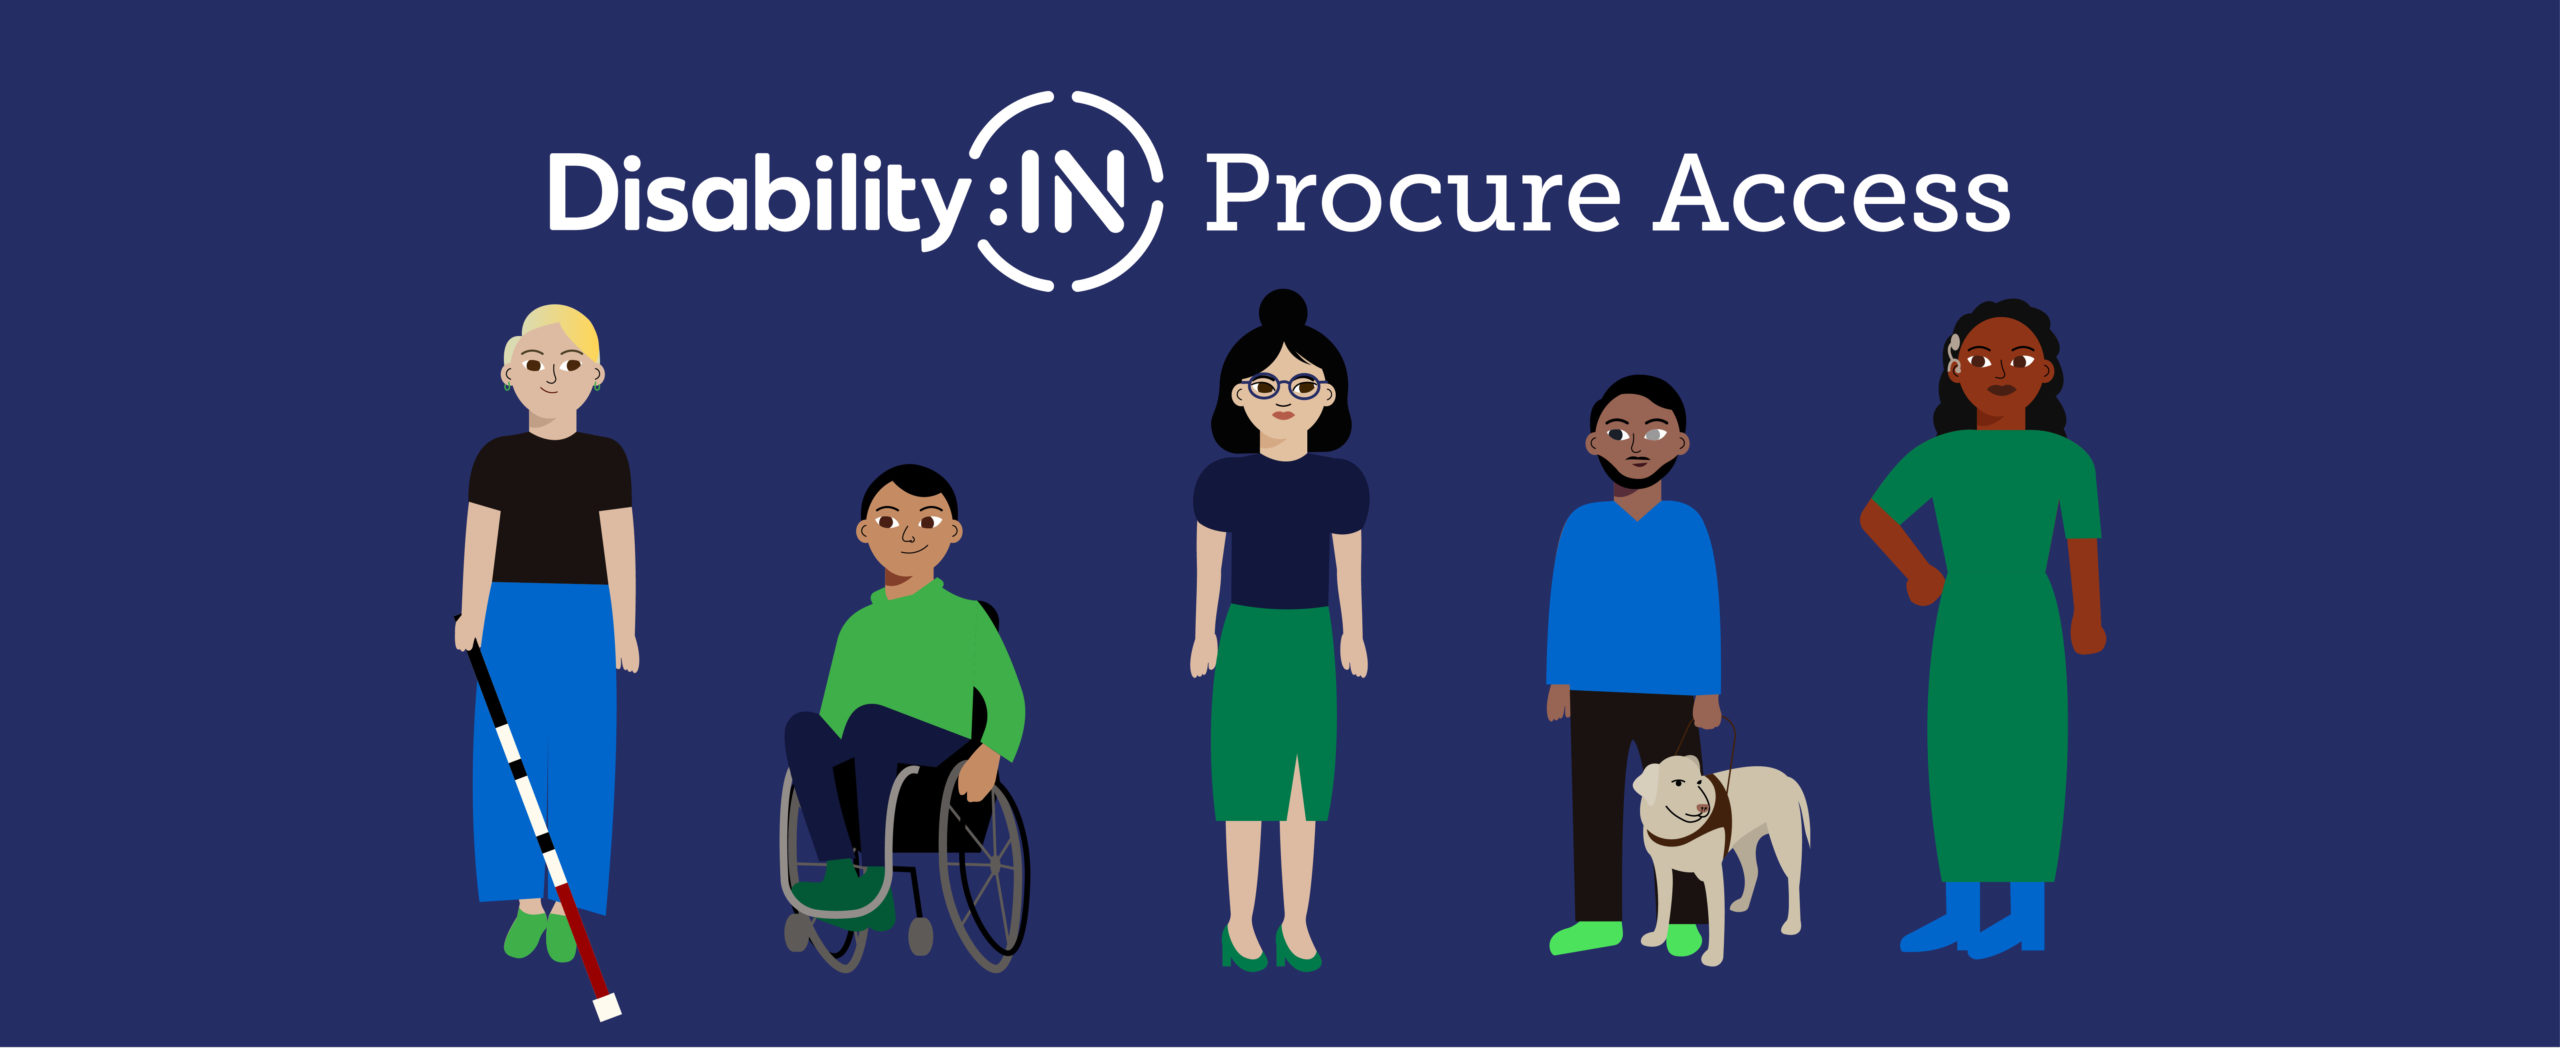 Procure Access Initiatives and Human Impact